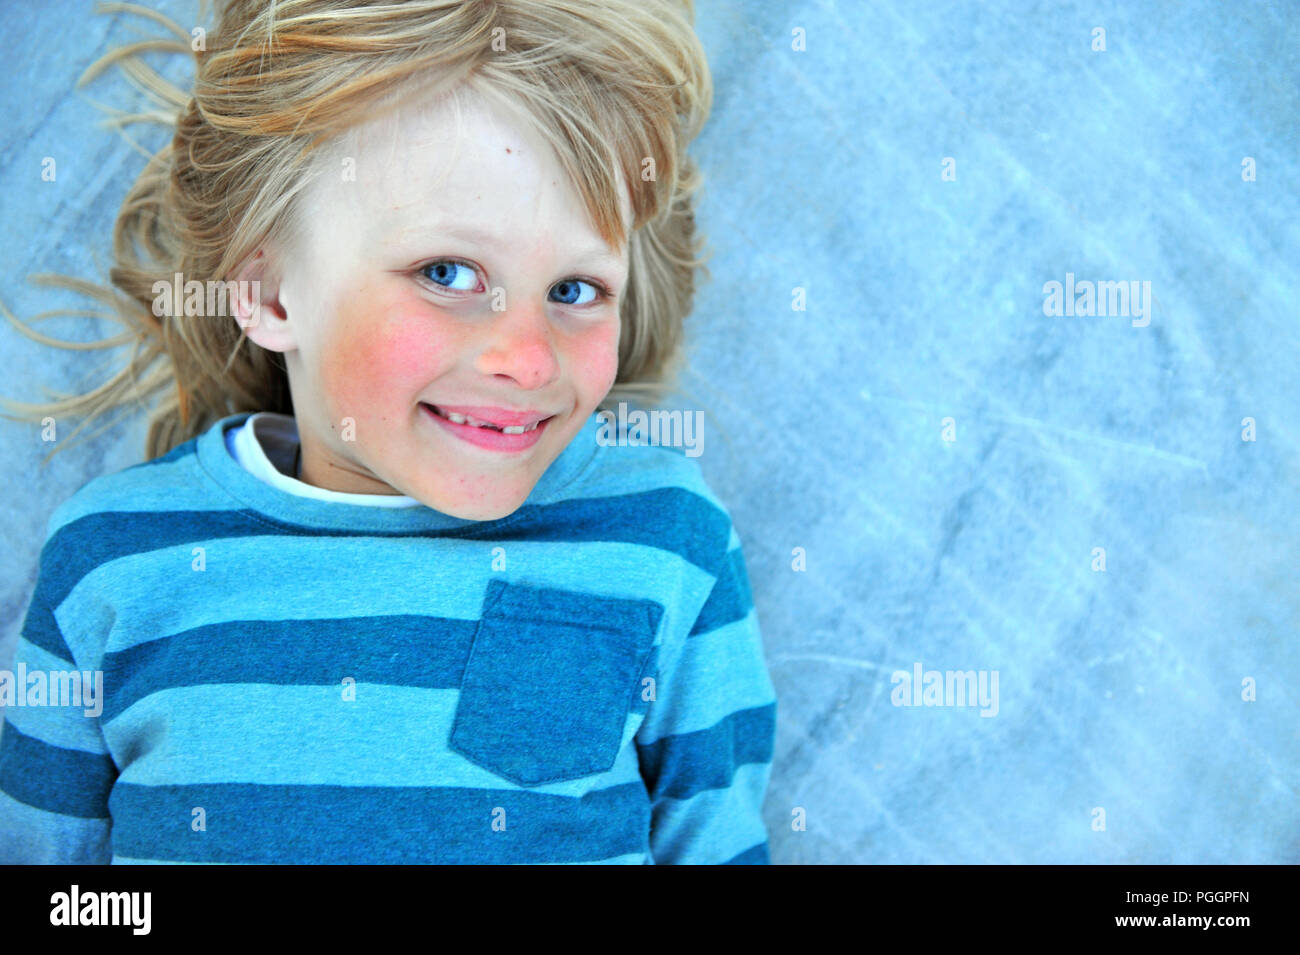 Portrat of sun-tanned kid, top view Stock Photo